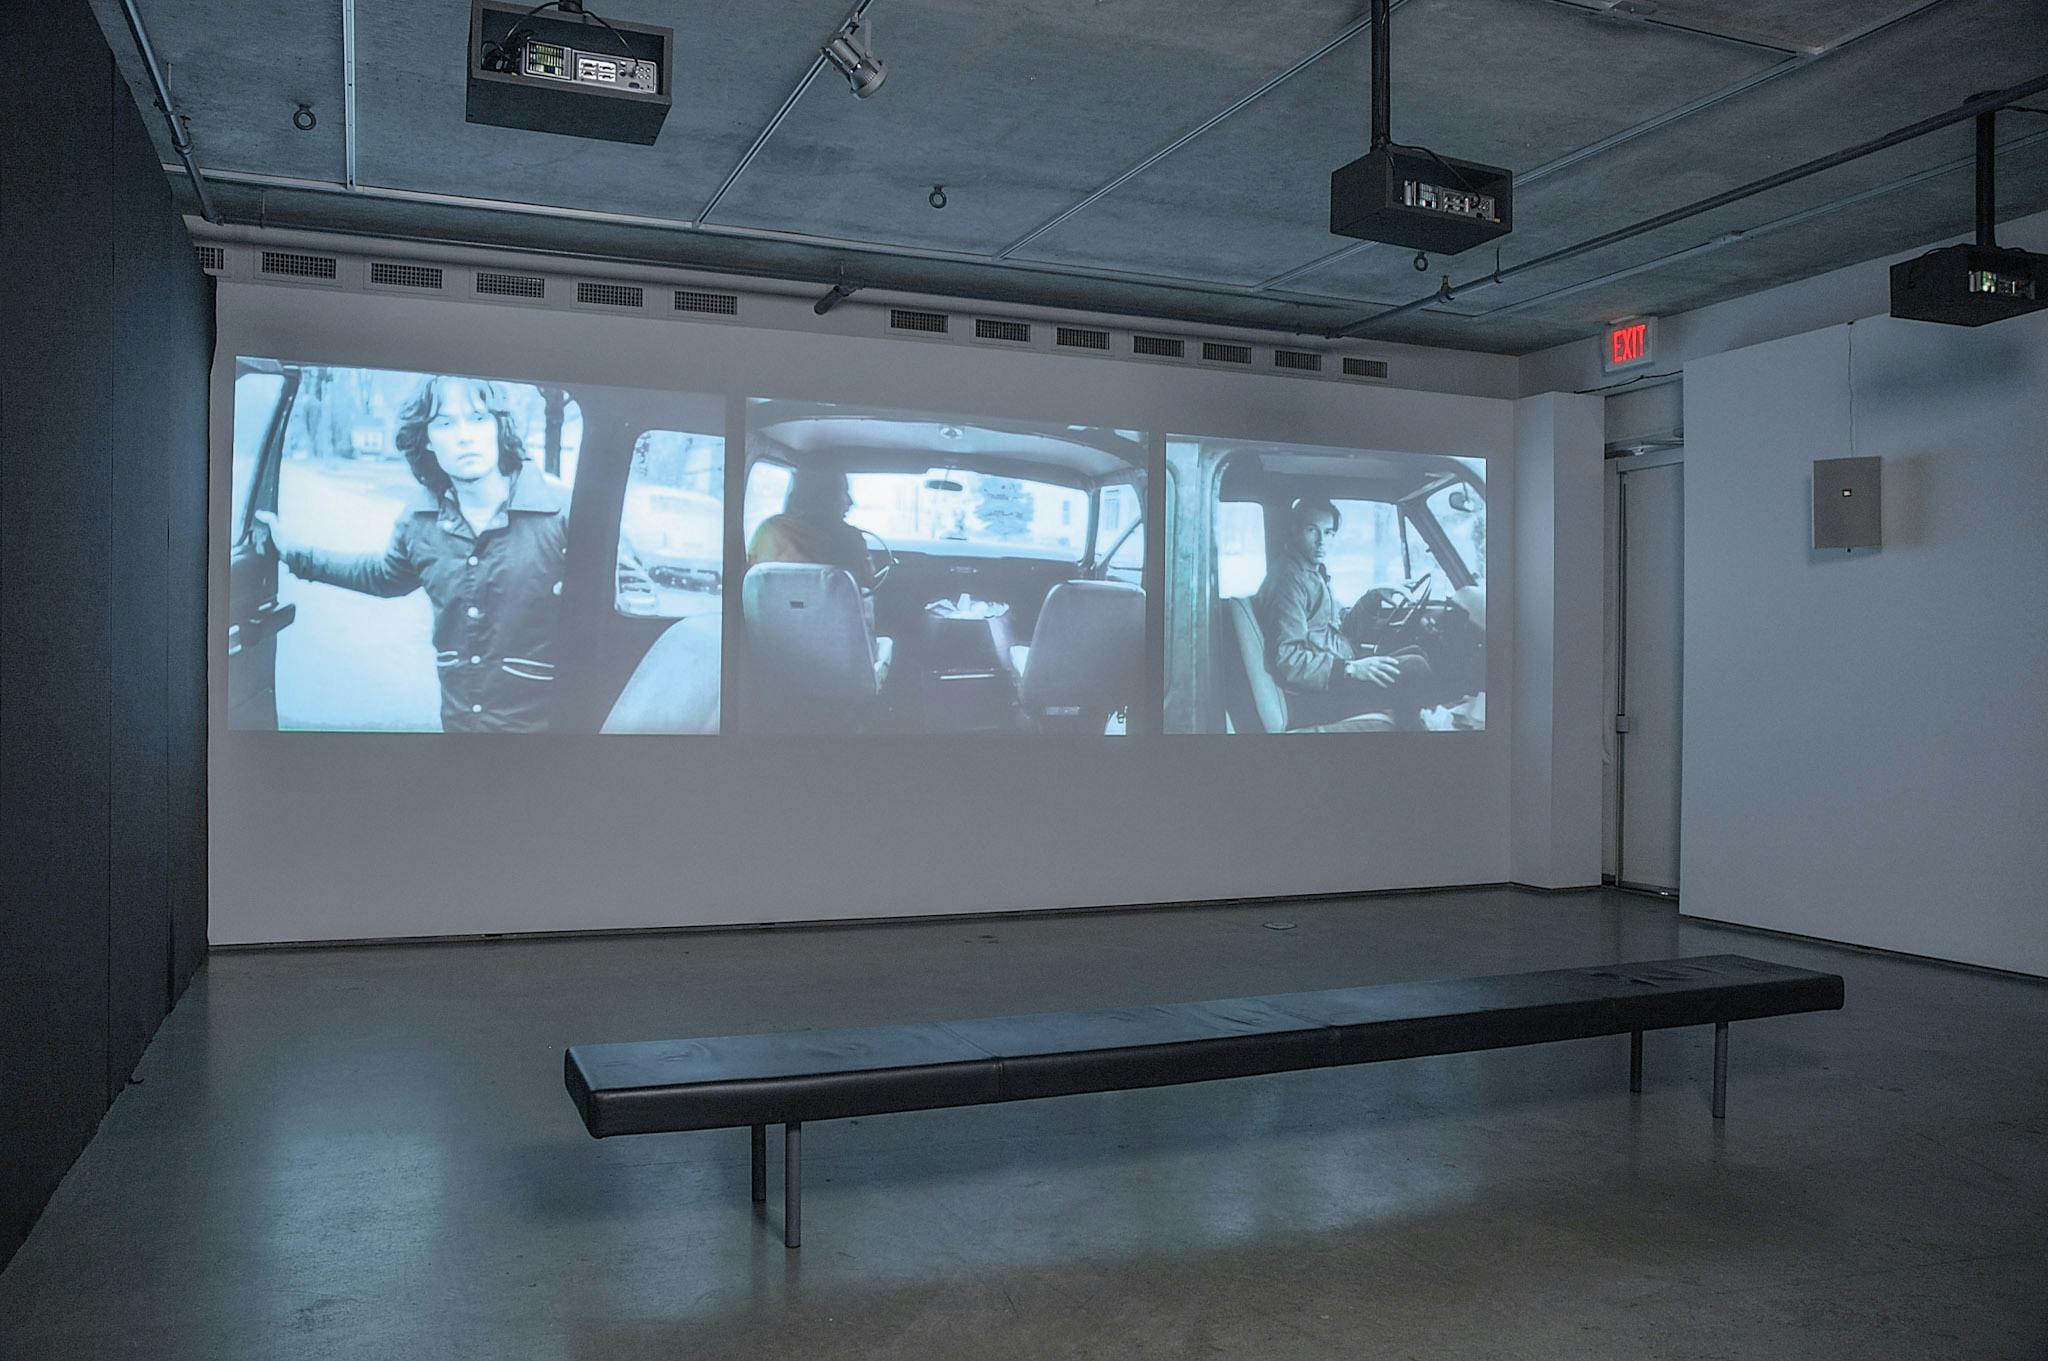 An installation image of three-channel video work projected on a gallery wall. The videos show people in a car from different angles. The left video show an image of a person standing outside while keeping one of the front doors of the car open.